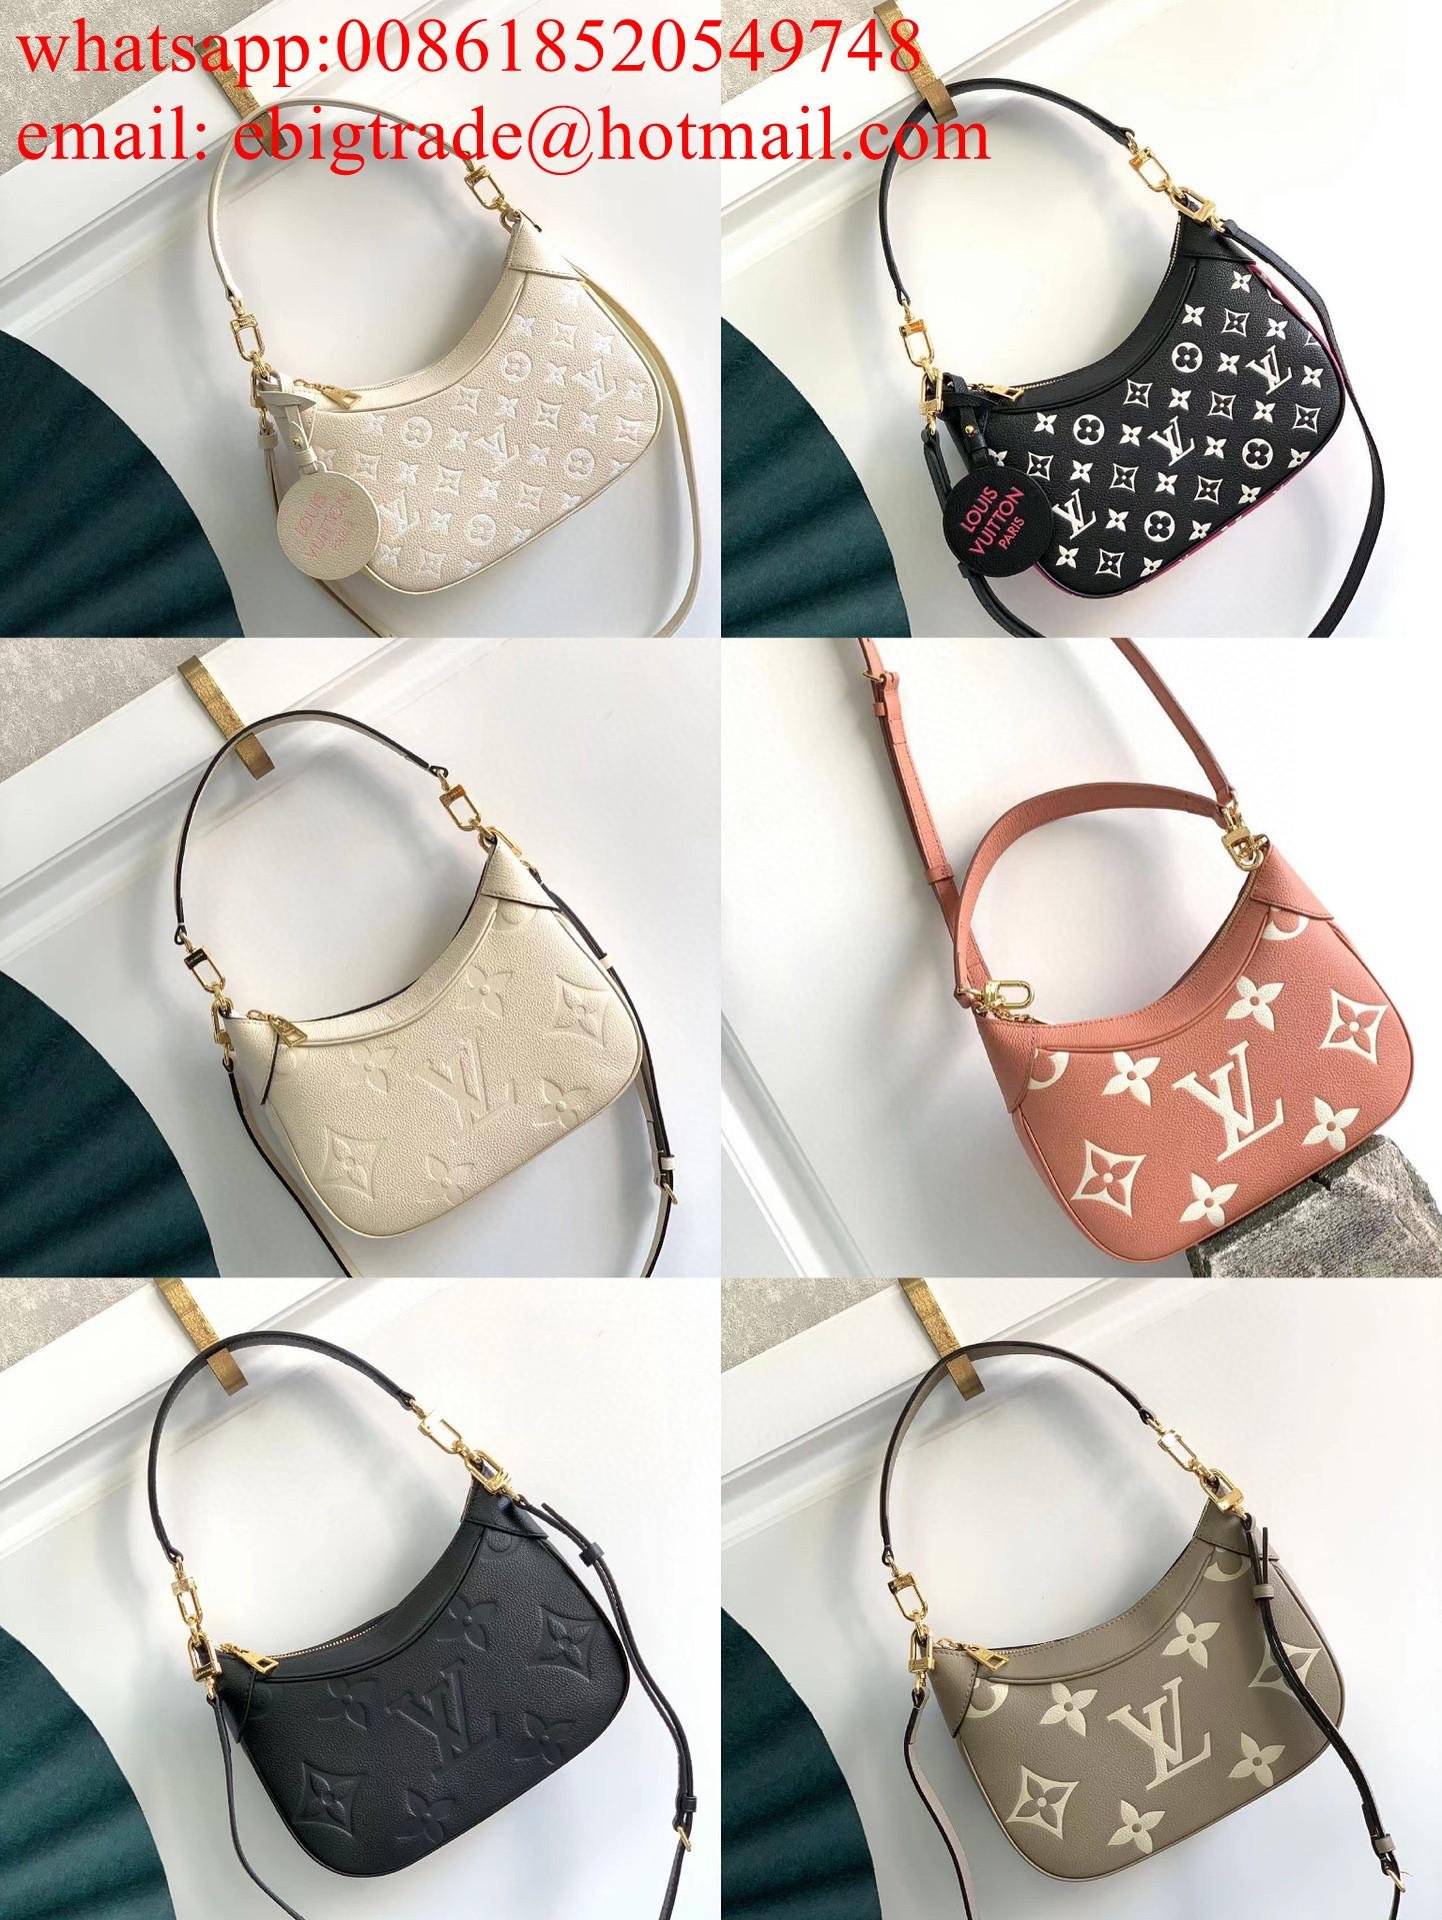 Wholesale               handbags on sale Cheap     andbags discount     ags 